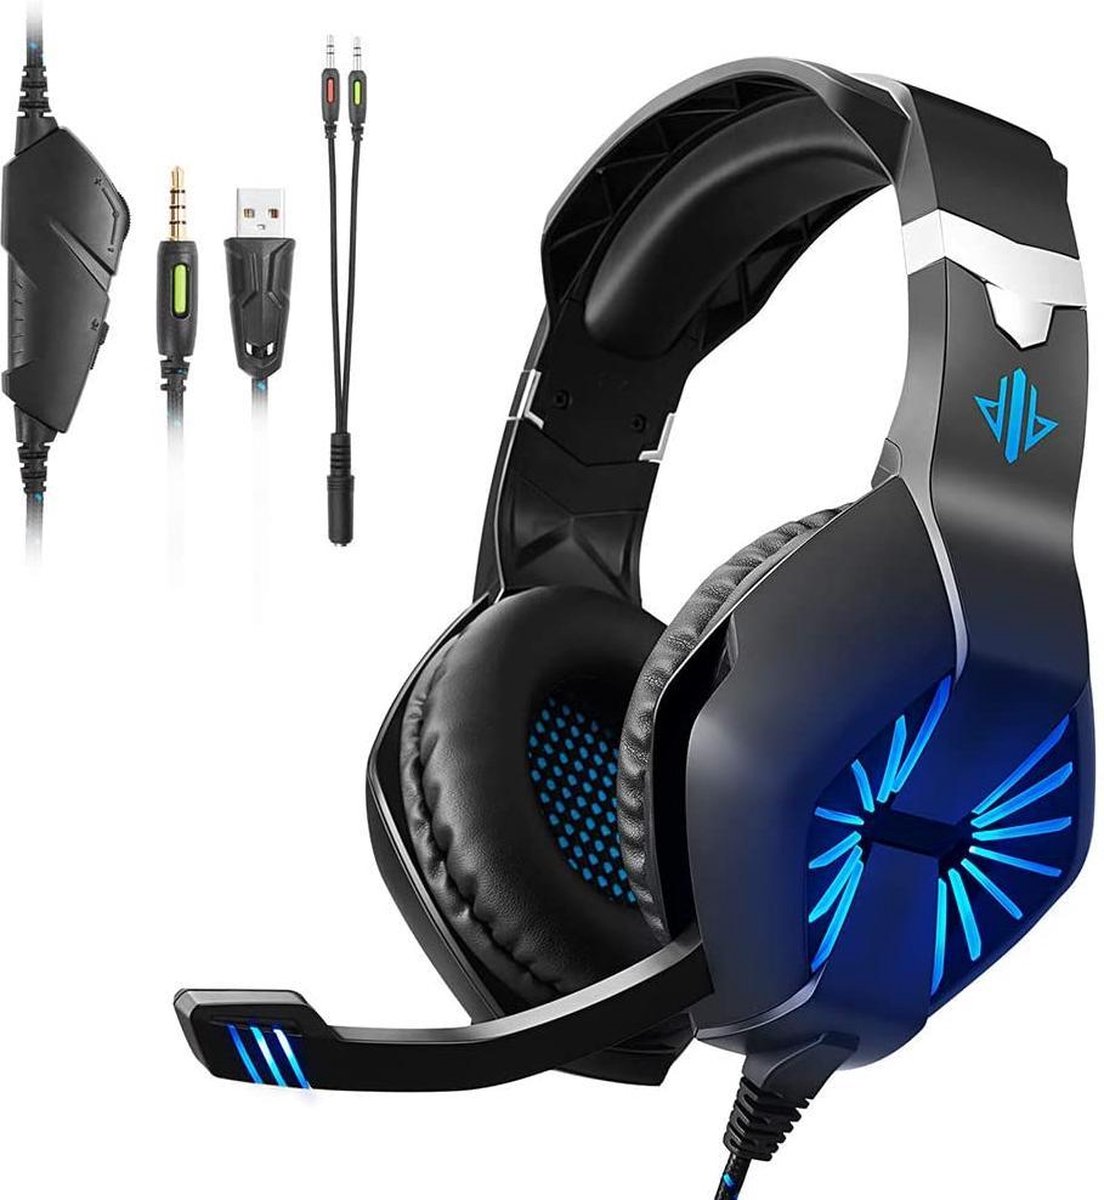 Gaming Headset met Microfoon - Headset/Microfoon - Headset PS4, PS5 Xbox One en PC